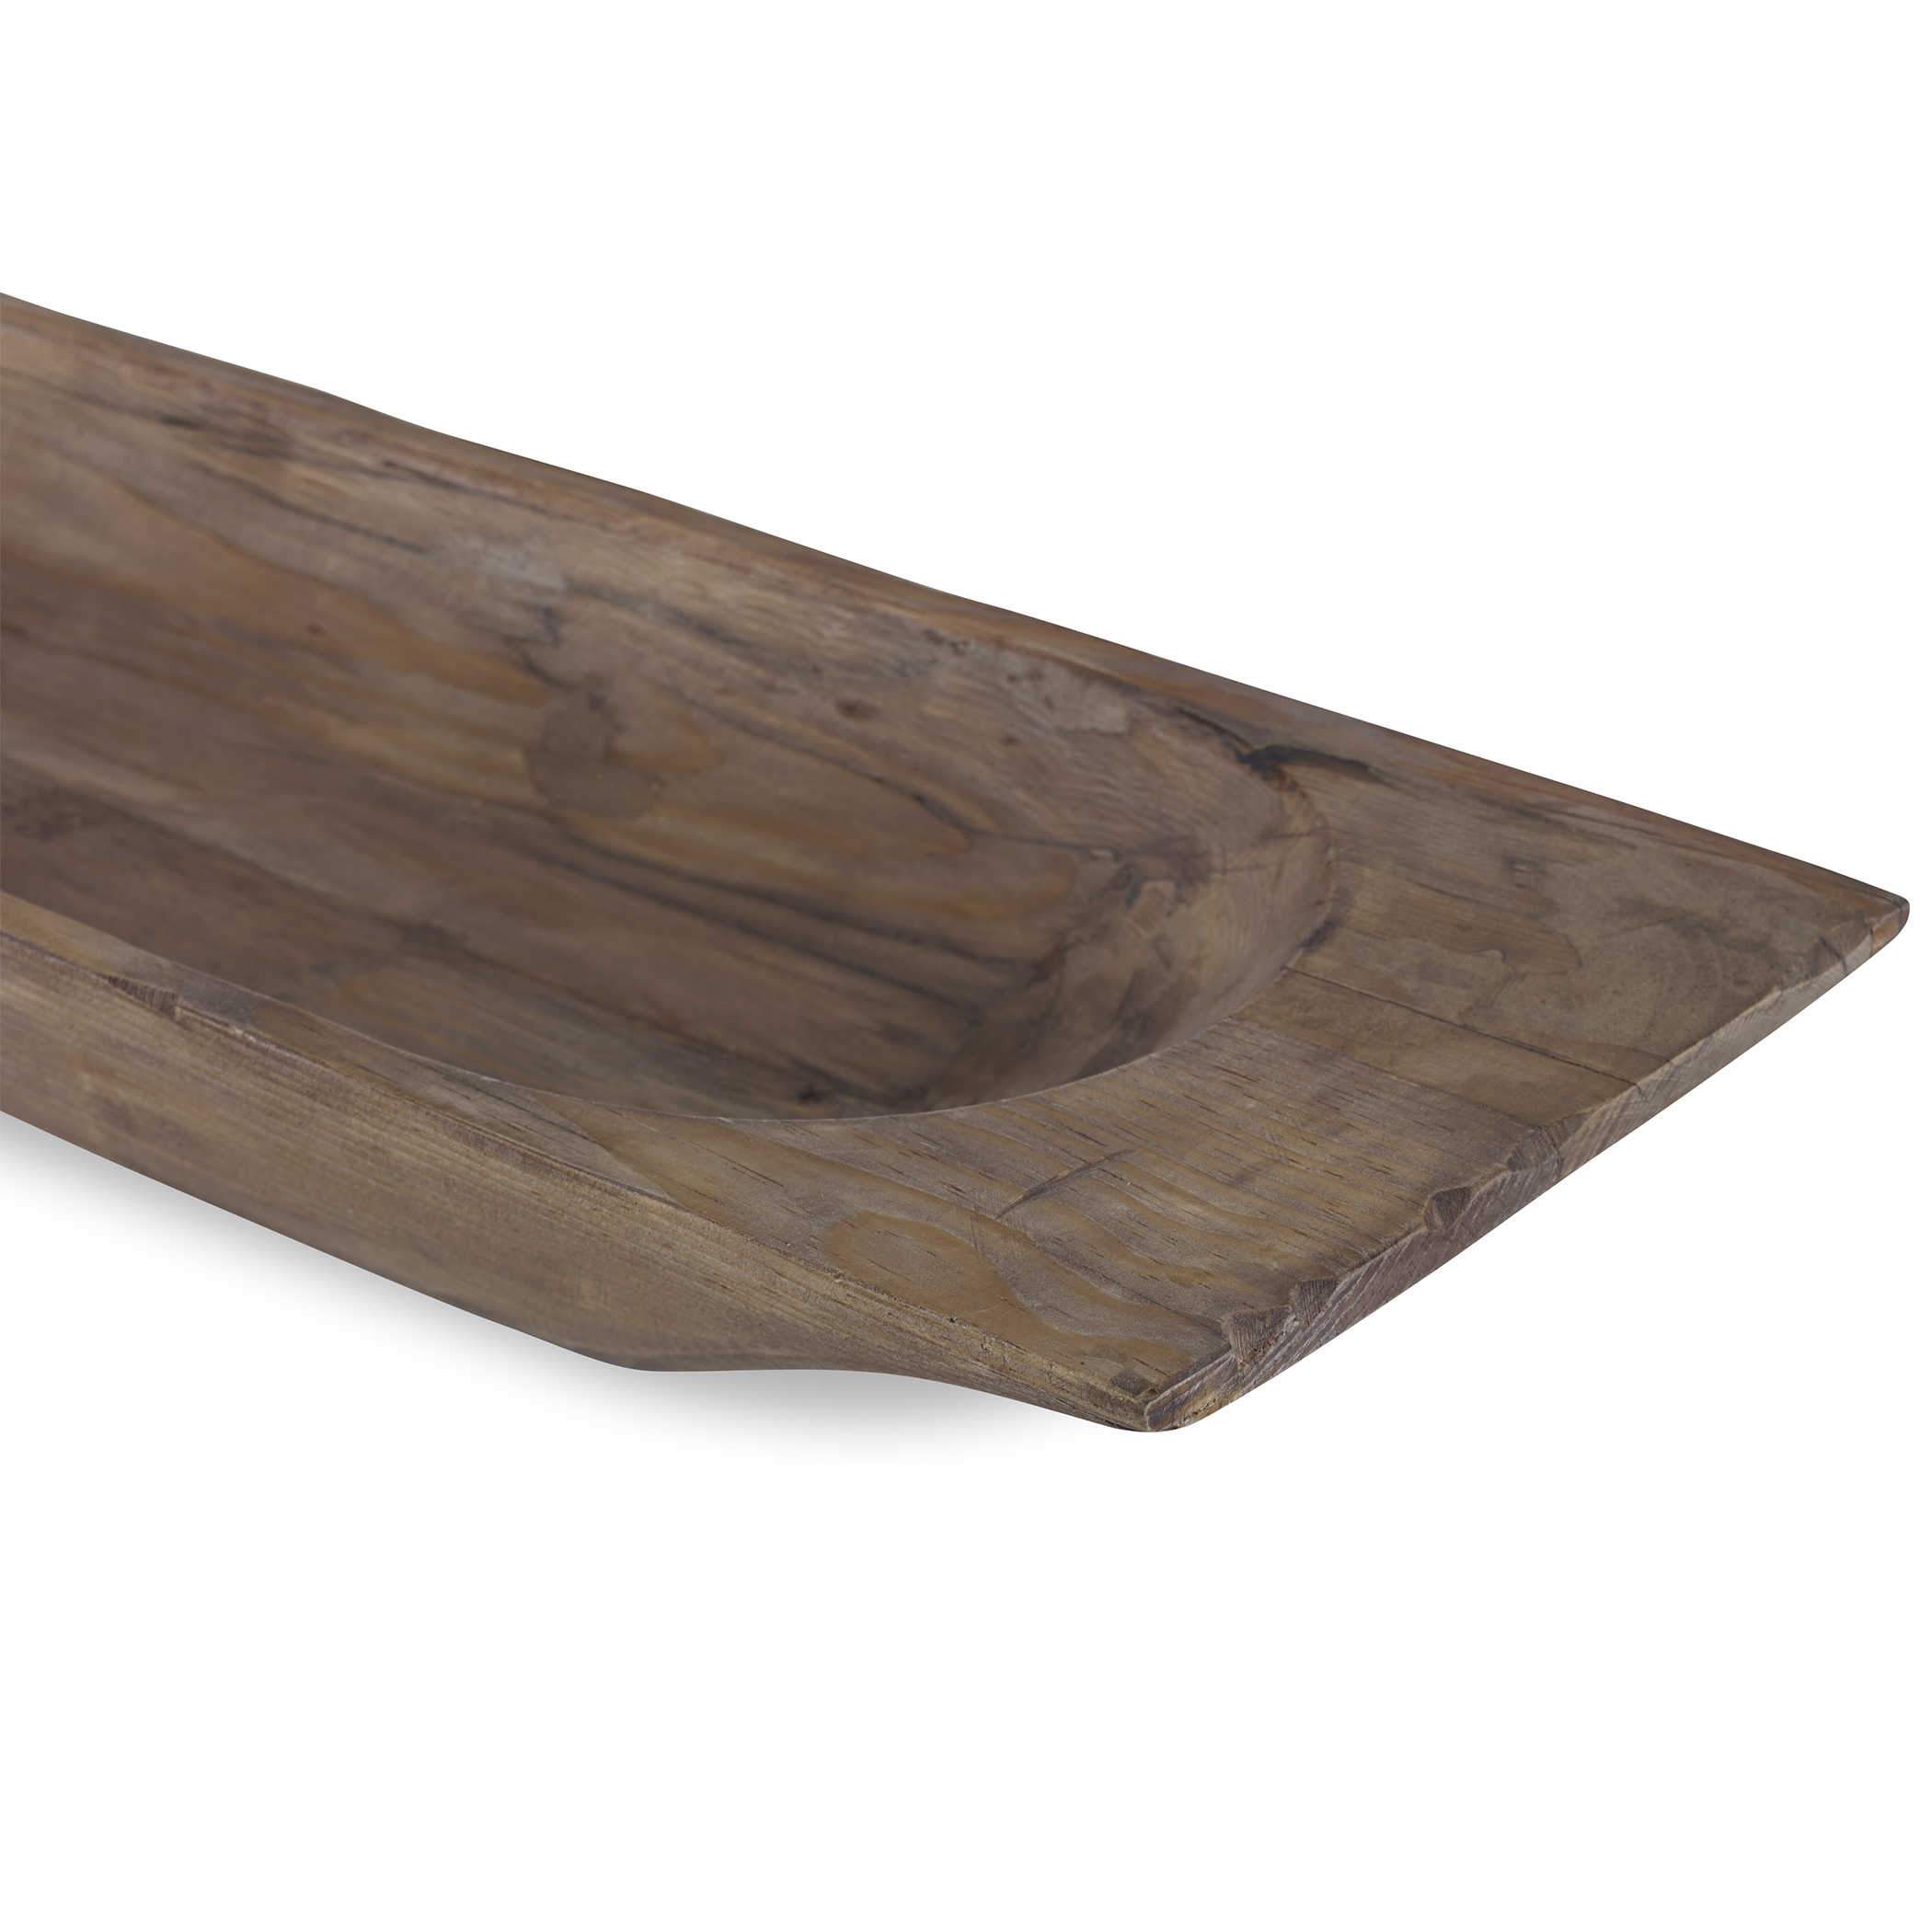 Dough Reclaimed Wood Tray Uttermost